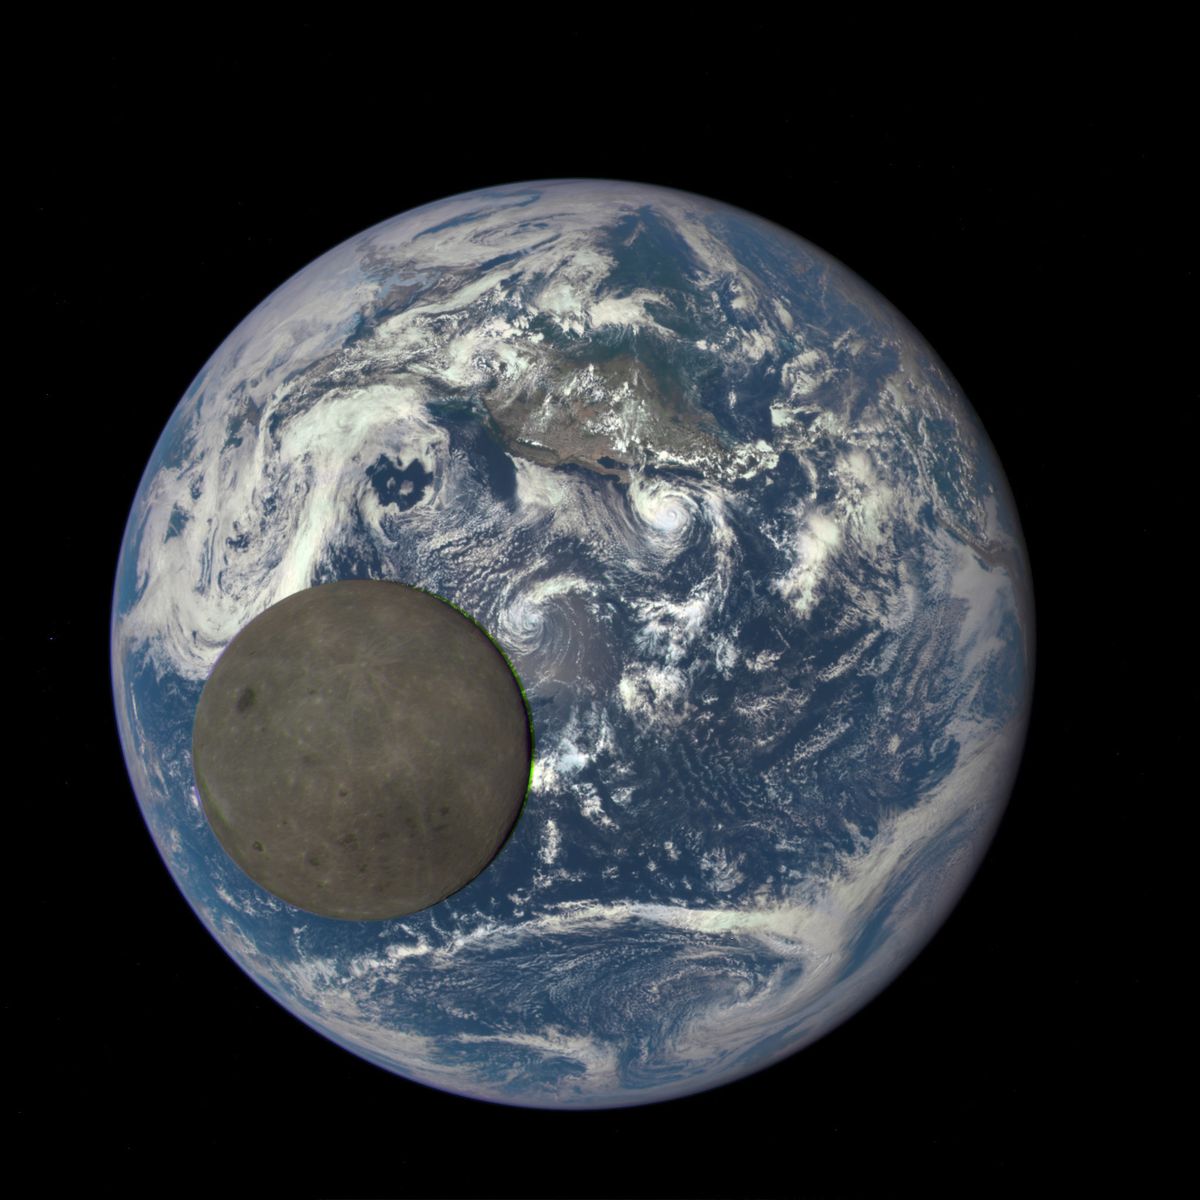 dark side of the moon in front of the earth